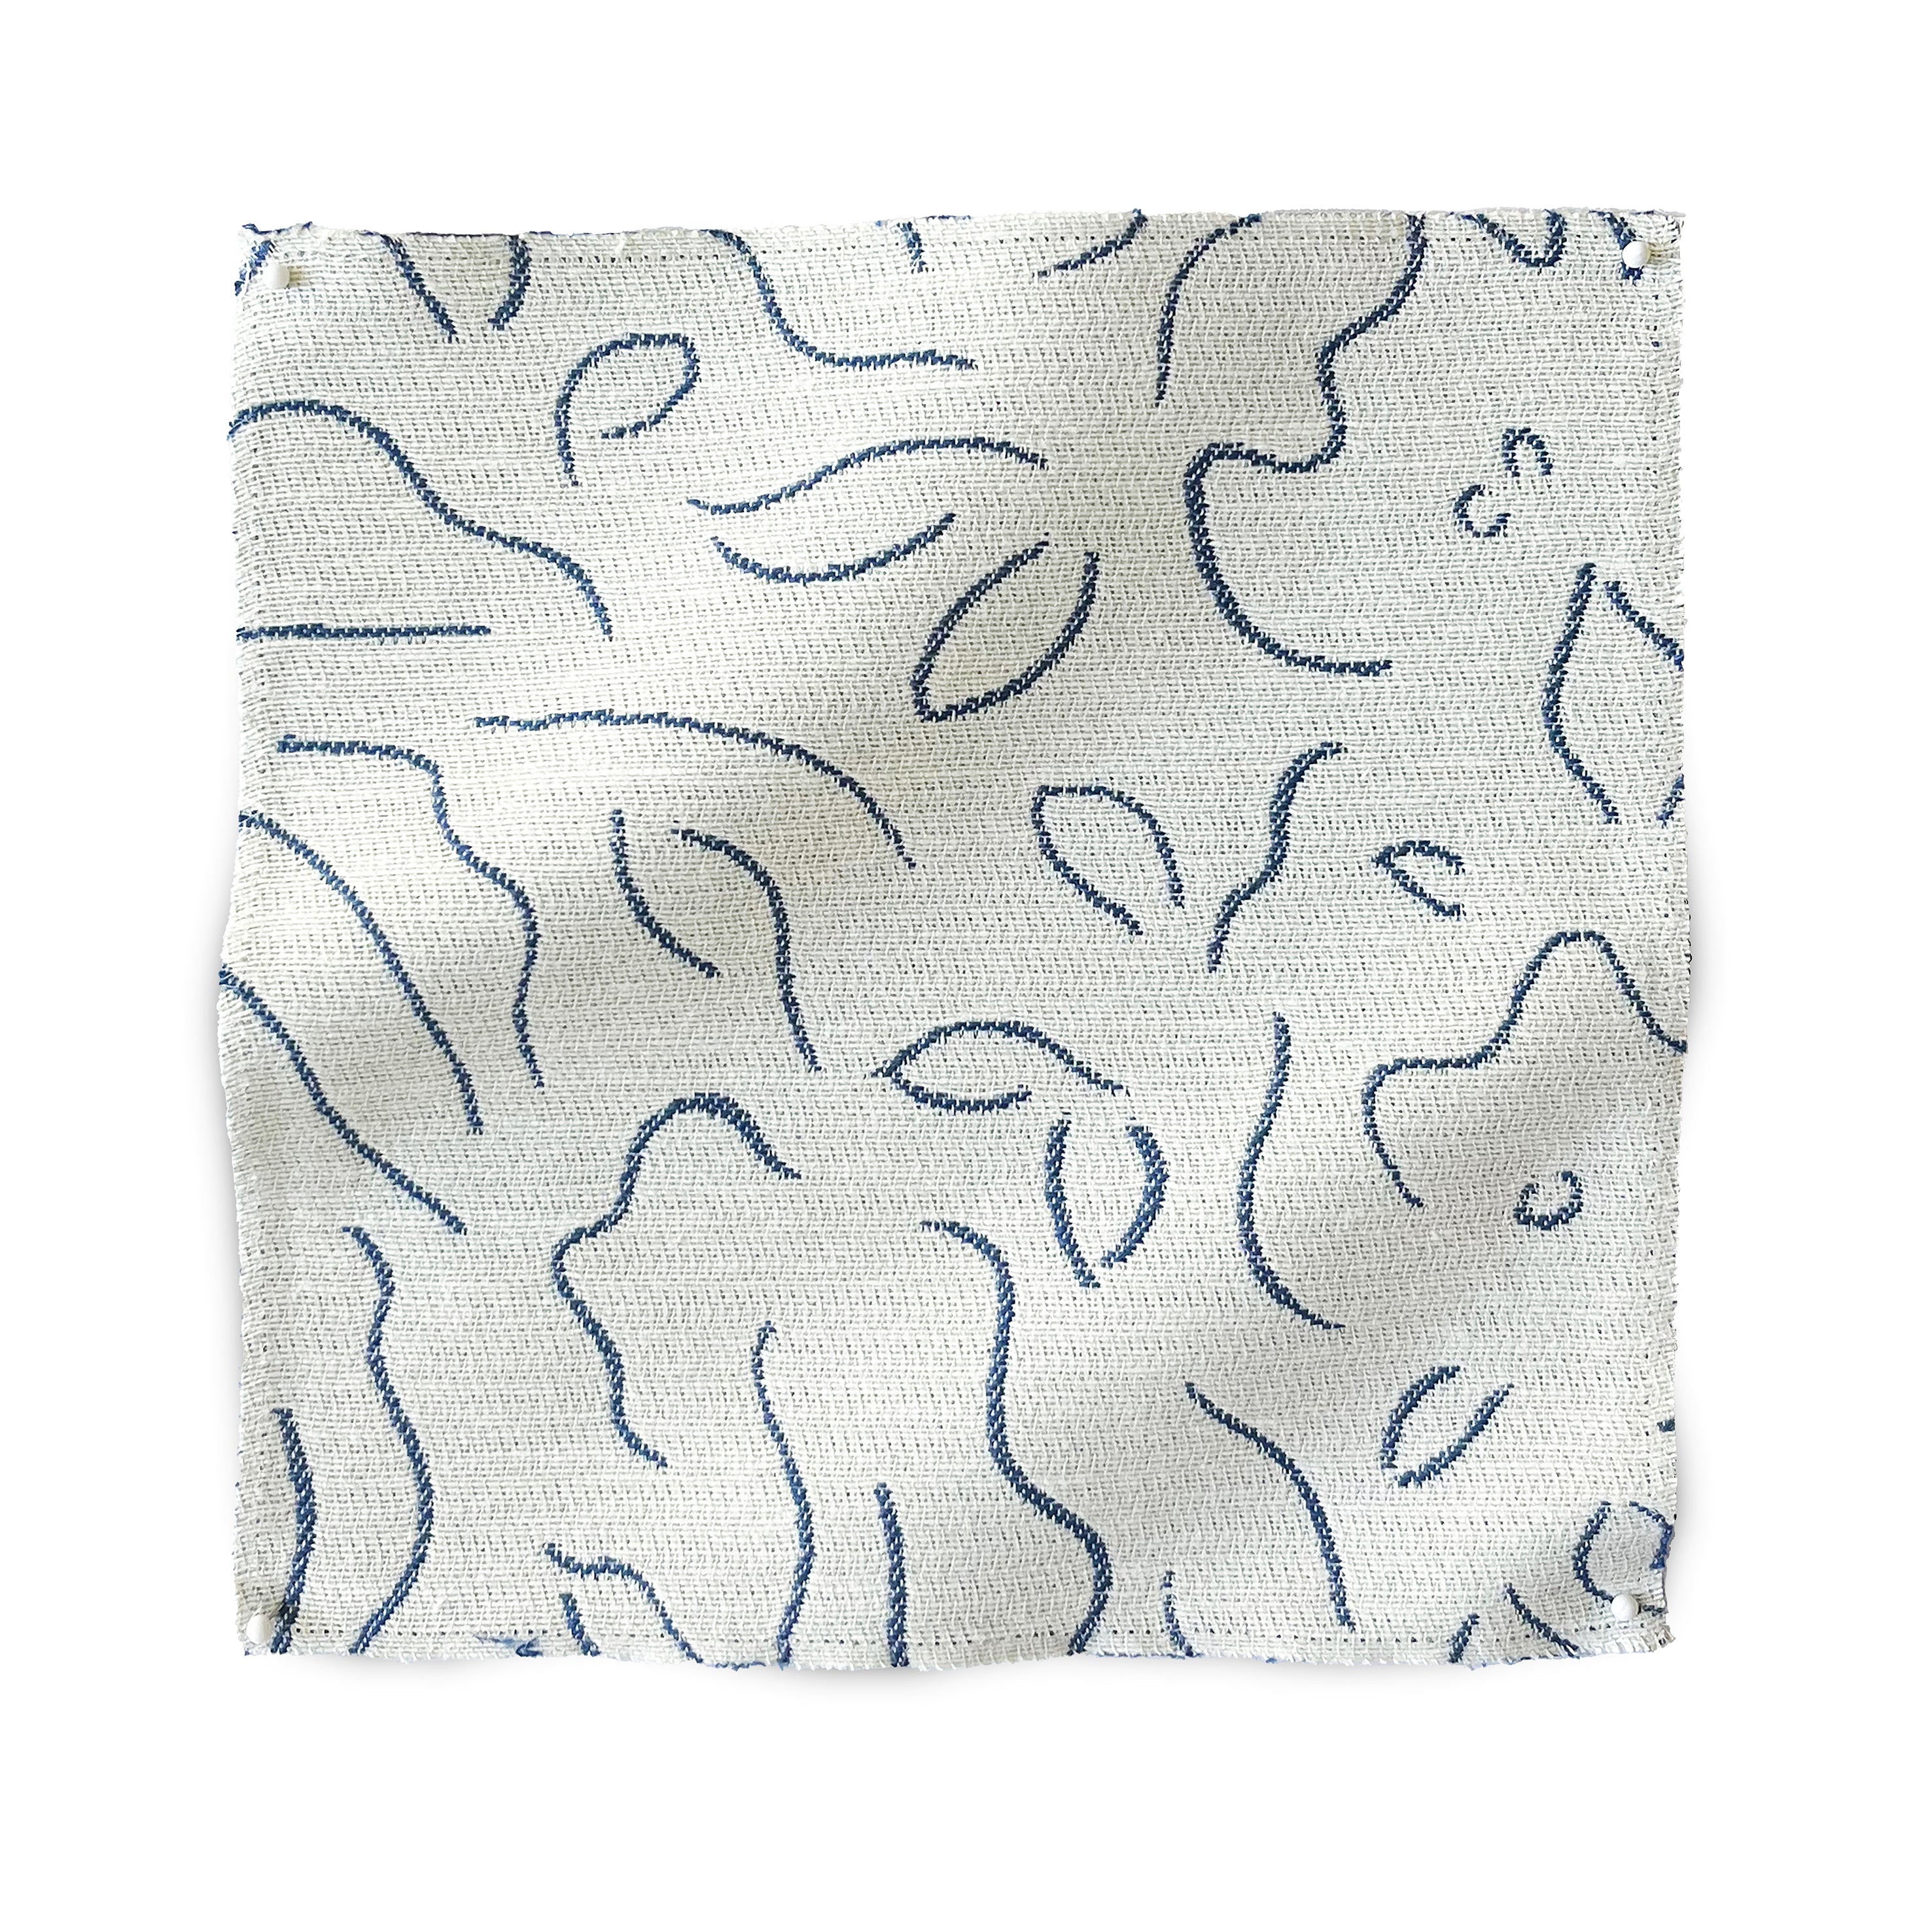 Square fabric swatch in a minimalist floral print in navy on a cream field.